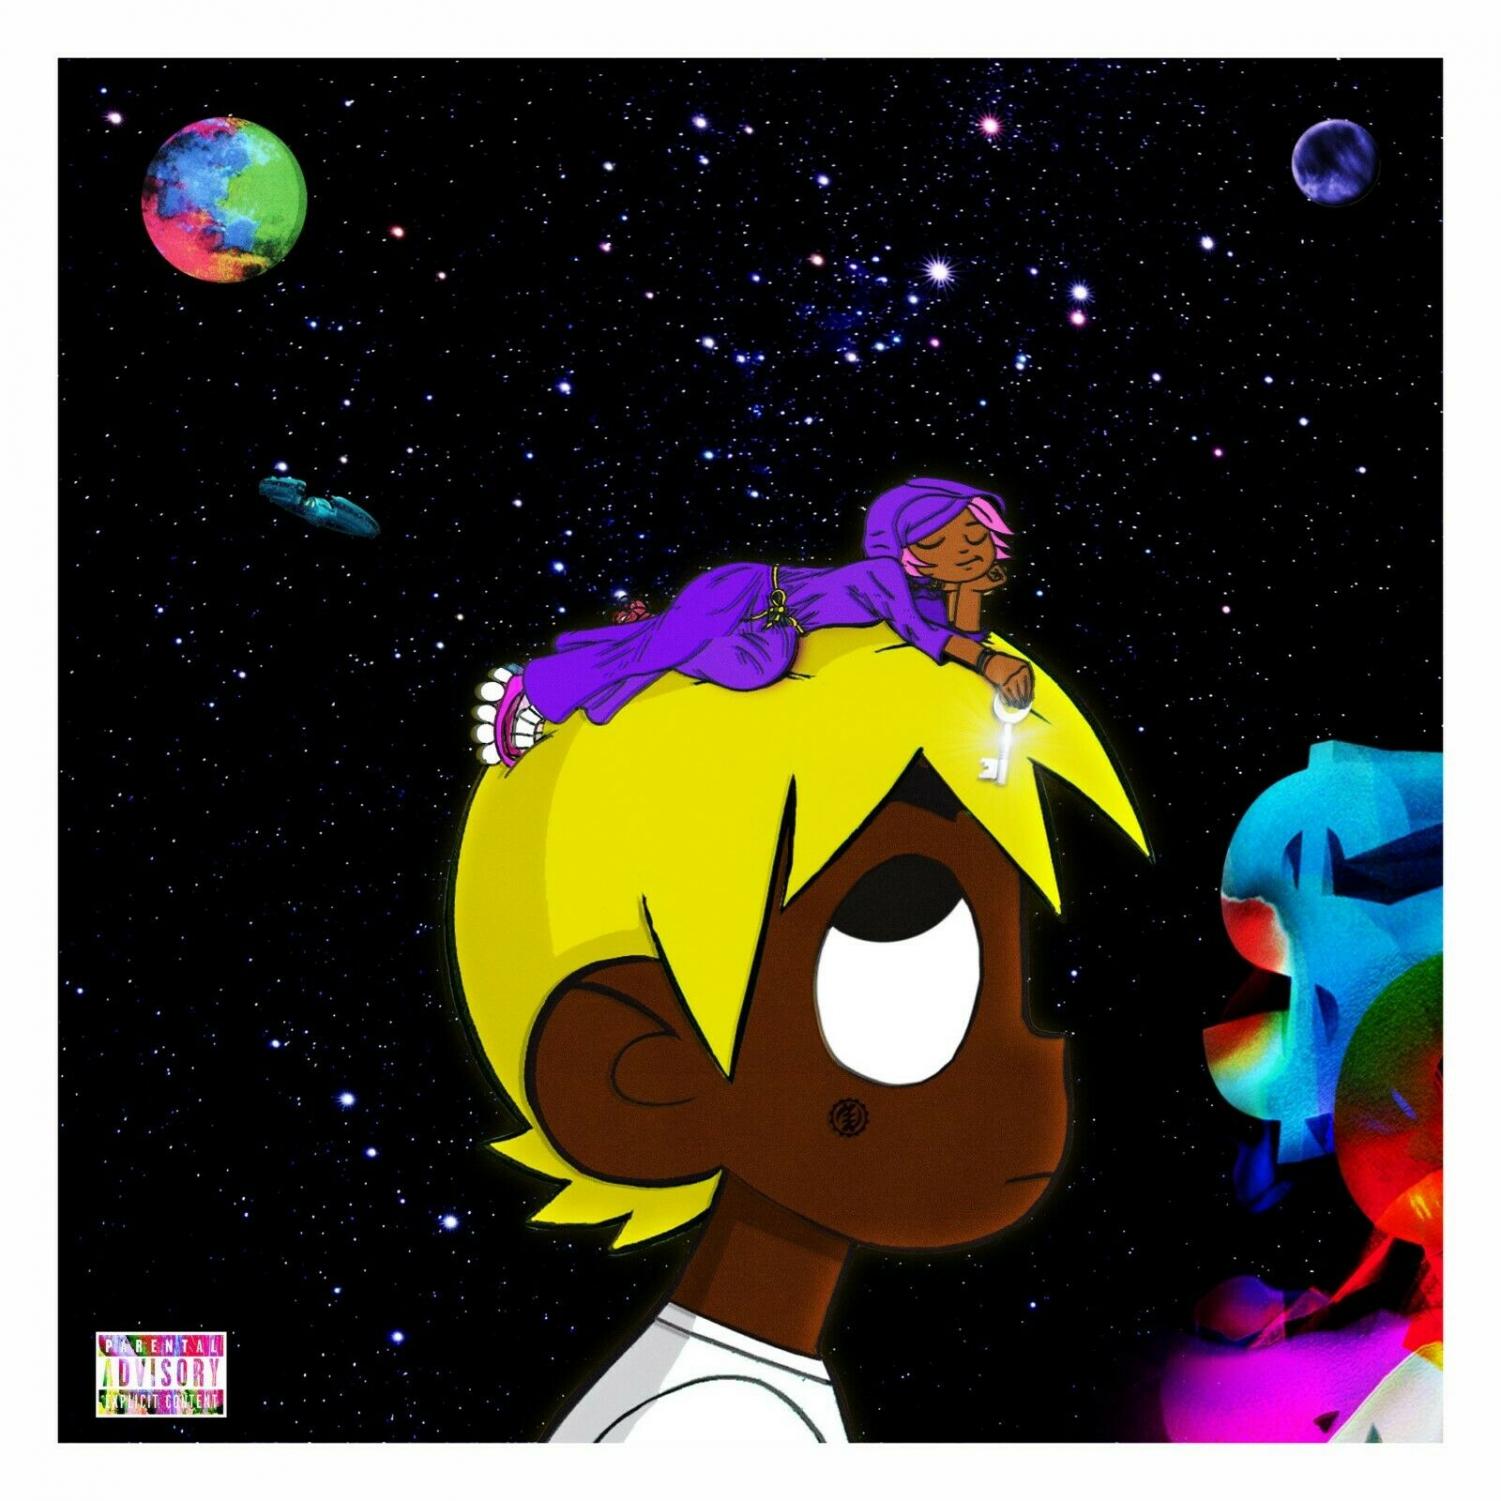 REVIEW Lil Uzi Vert's latest project reflects all his